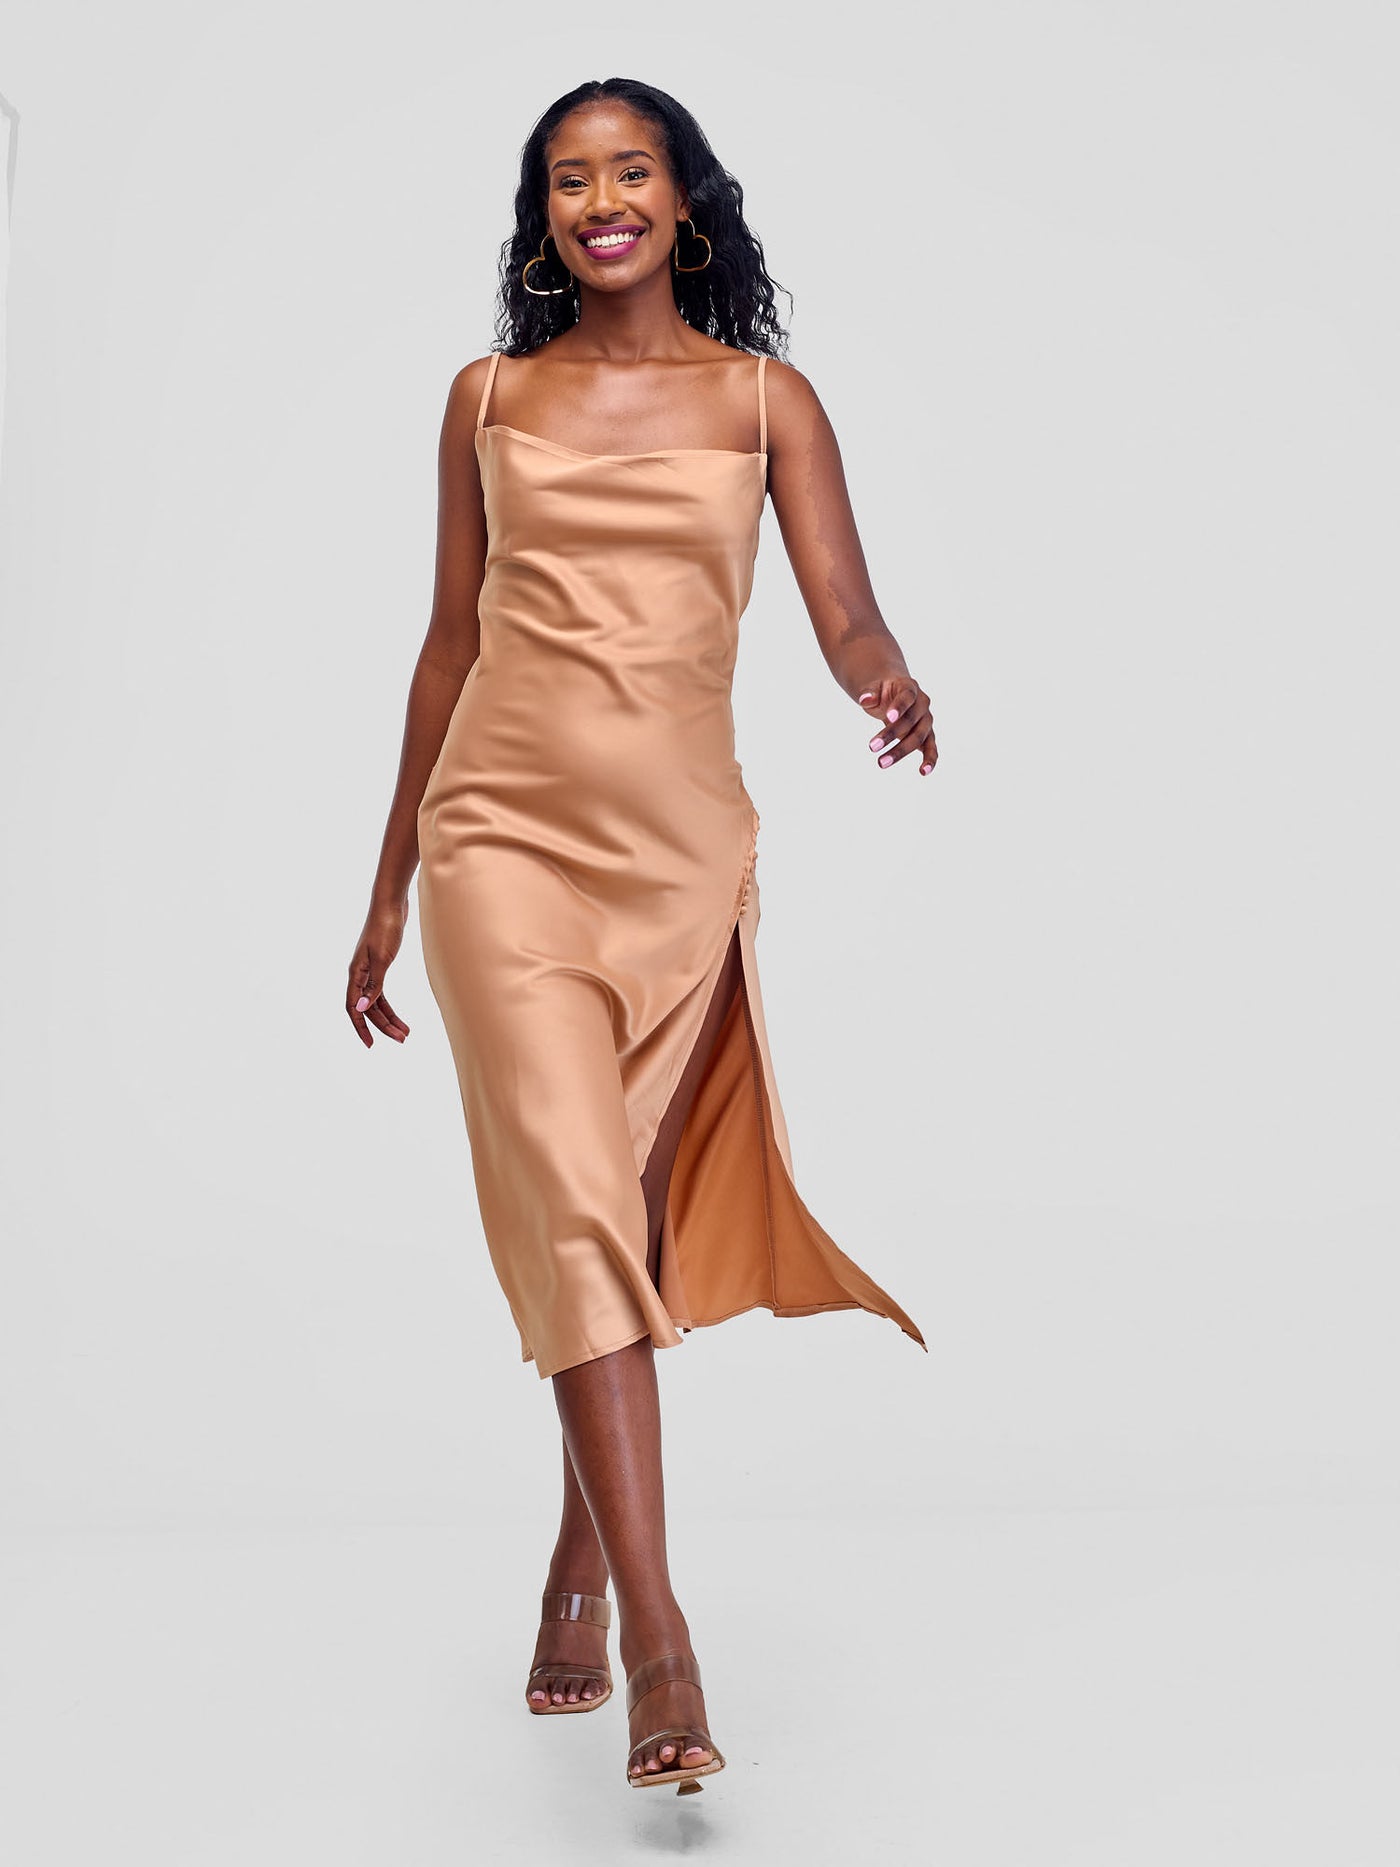 Lola Satin Slip Dress With Side Buttons - Tan